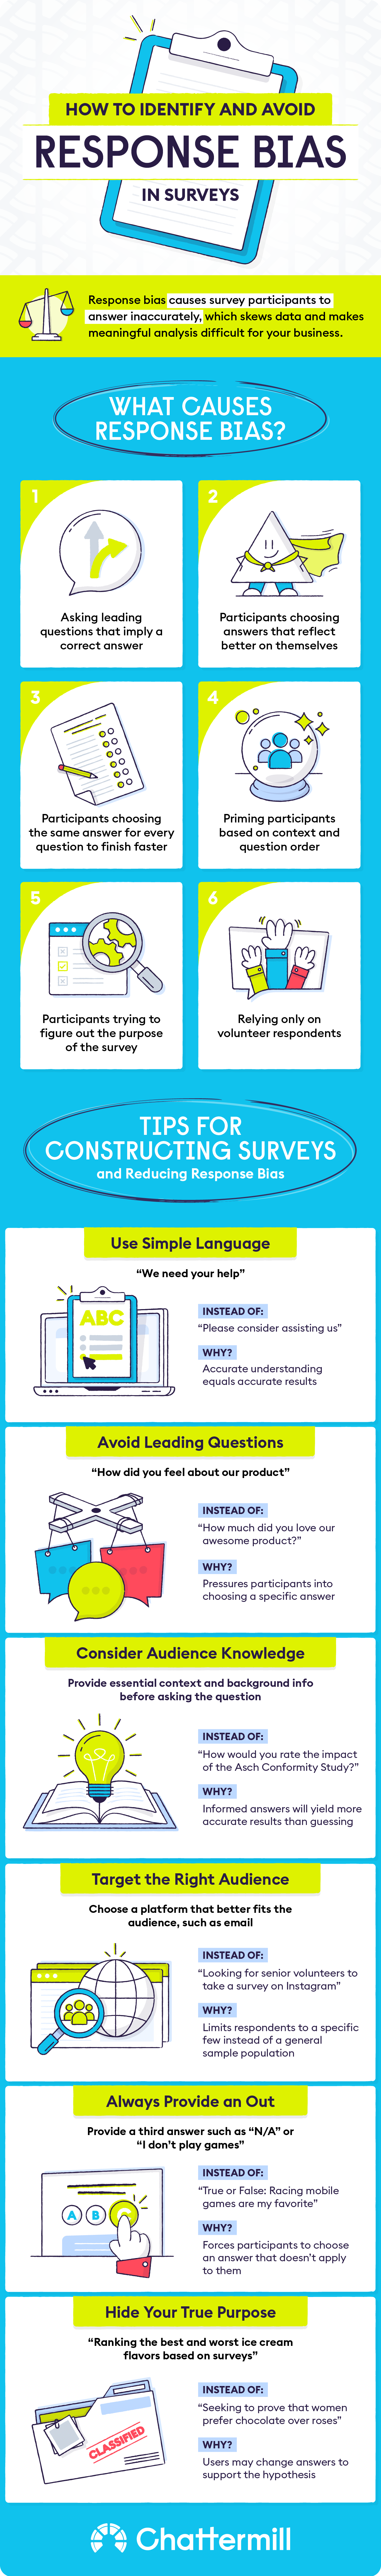 Infographic: How to Identify and Avoid Response Bias in Surveys